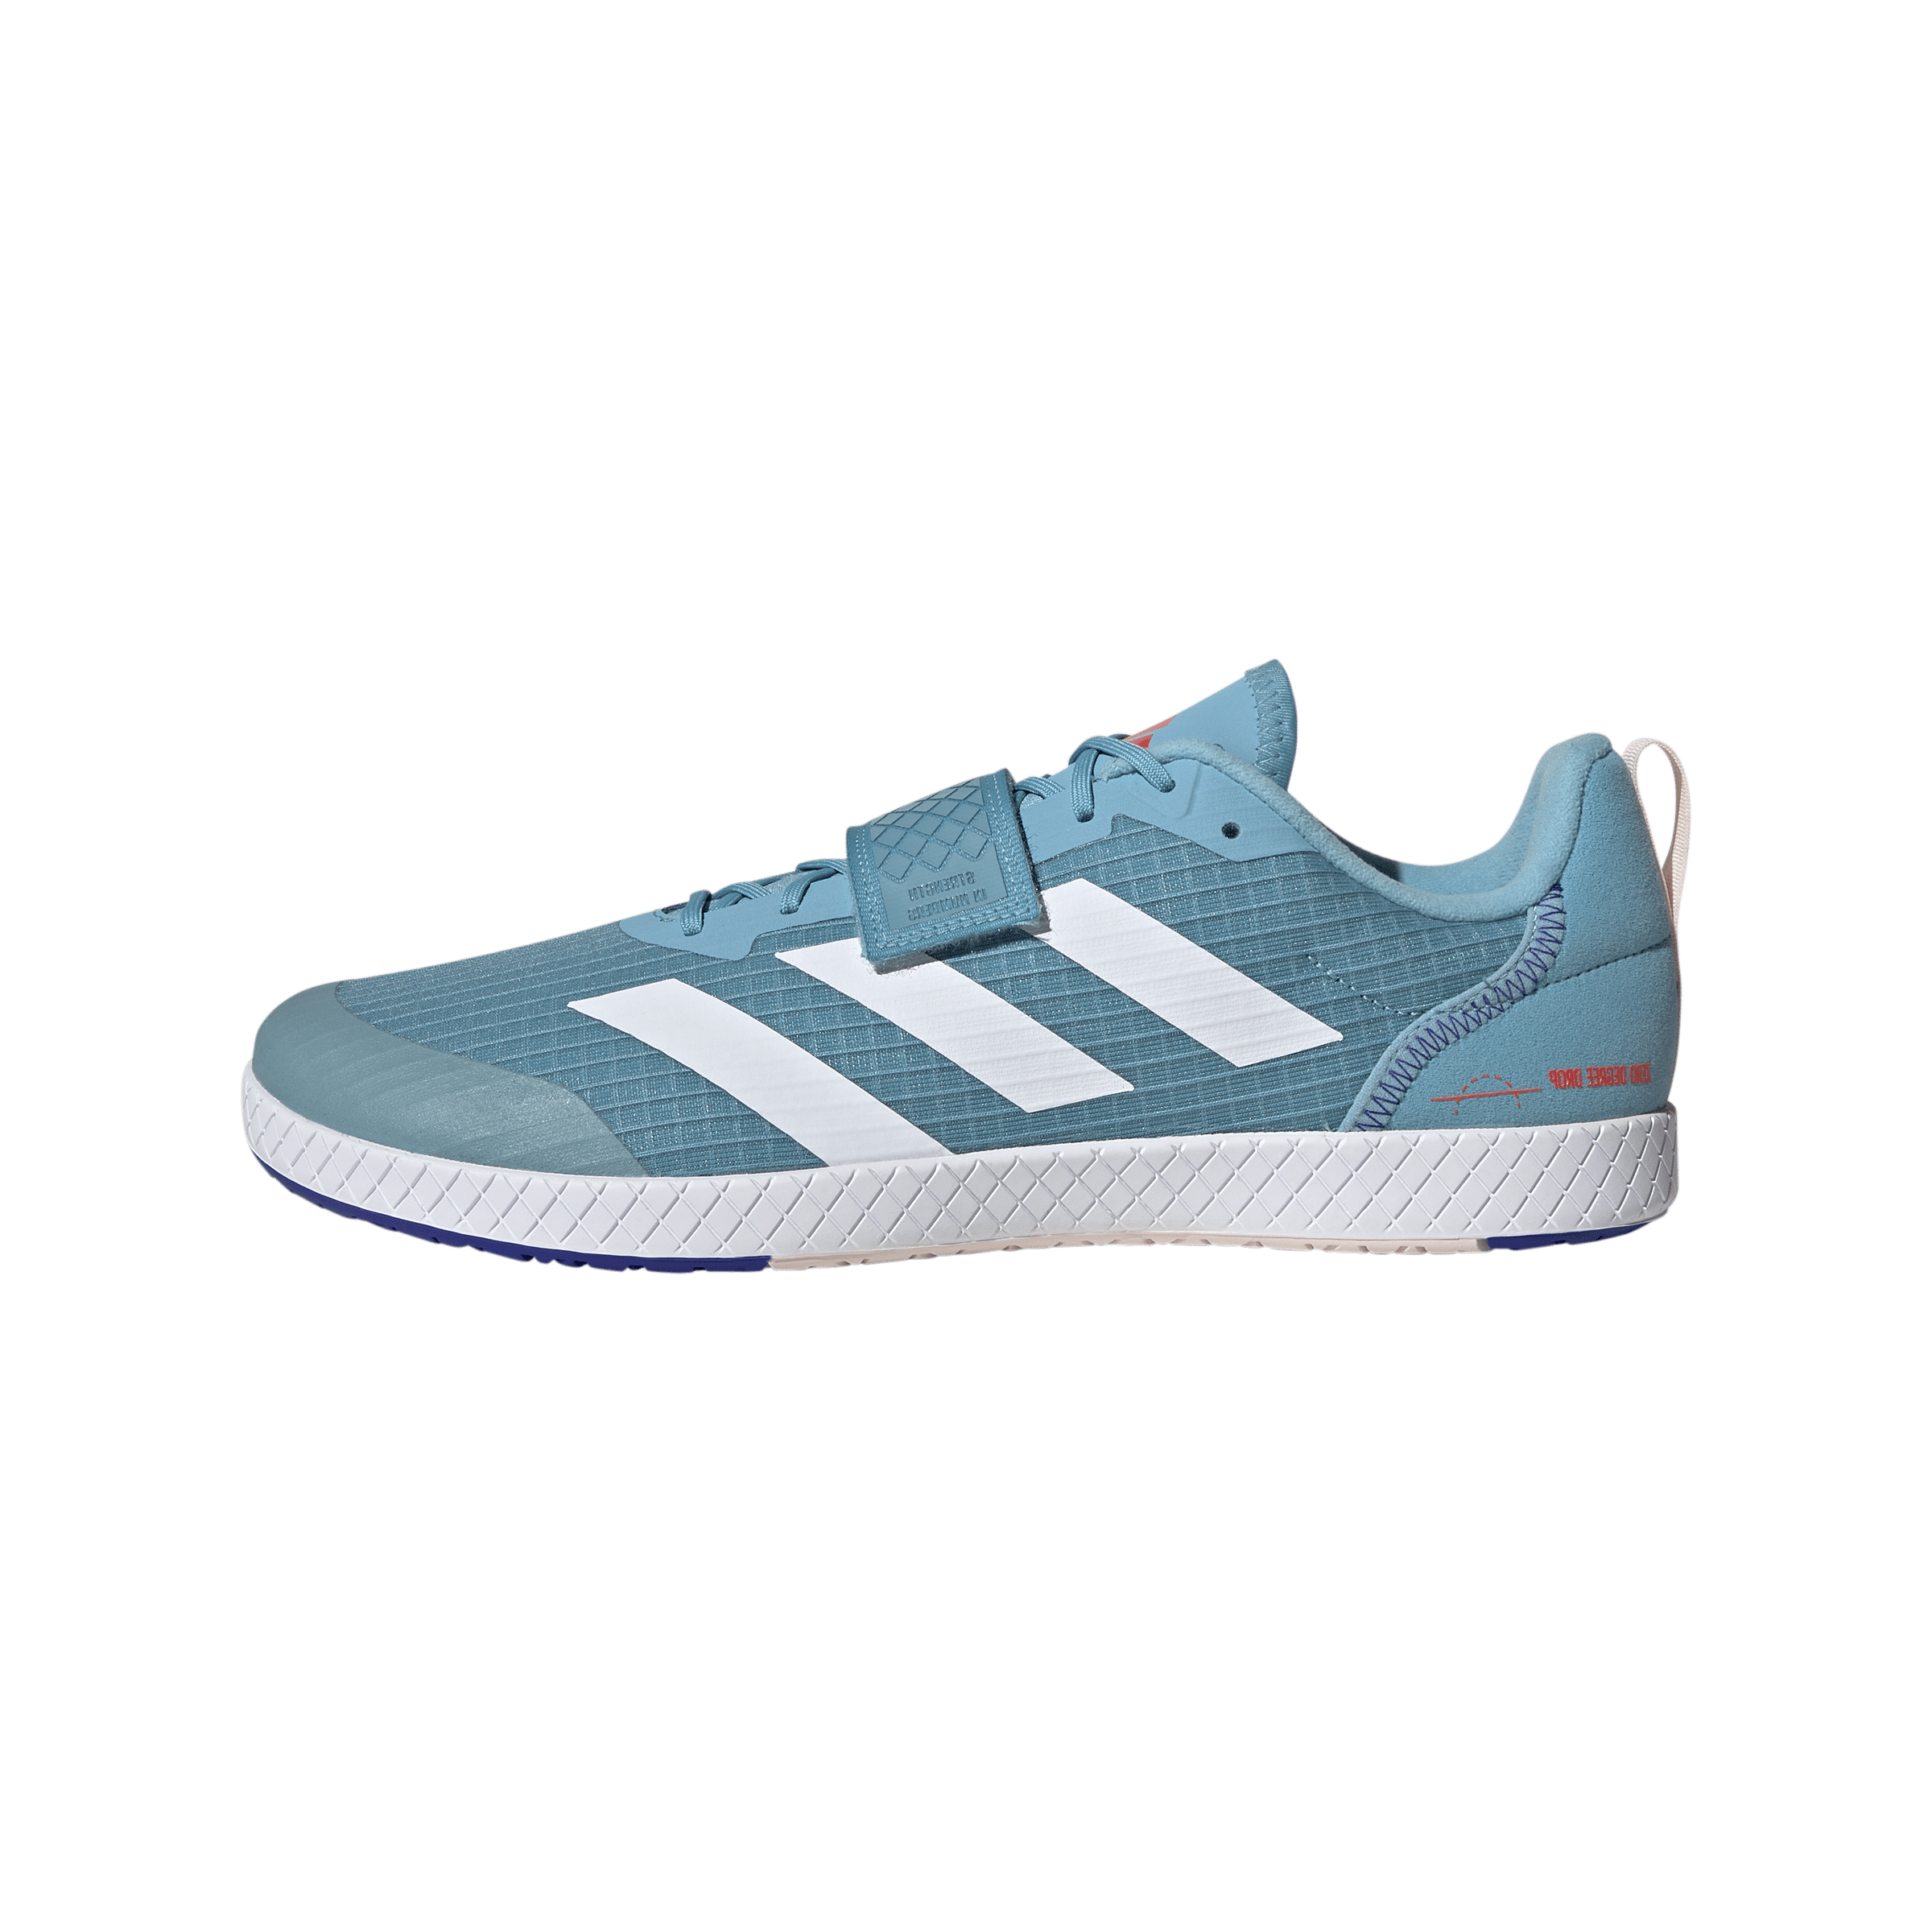 Adidas The Total Lifting Shoes in Blue and White - WIT Fitness